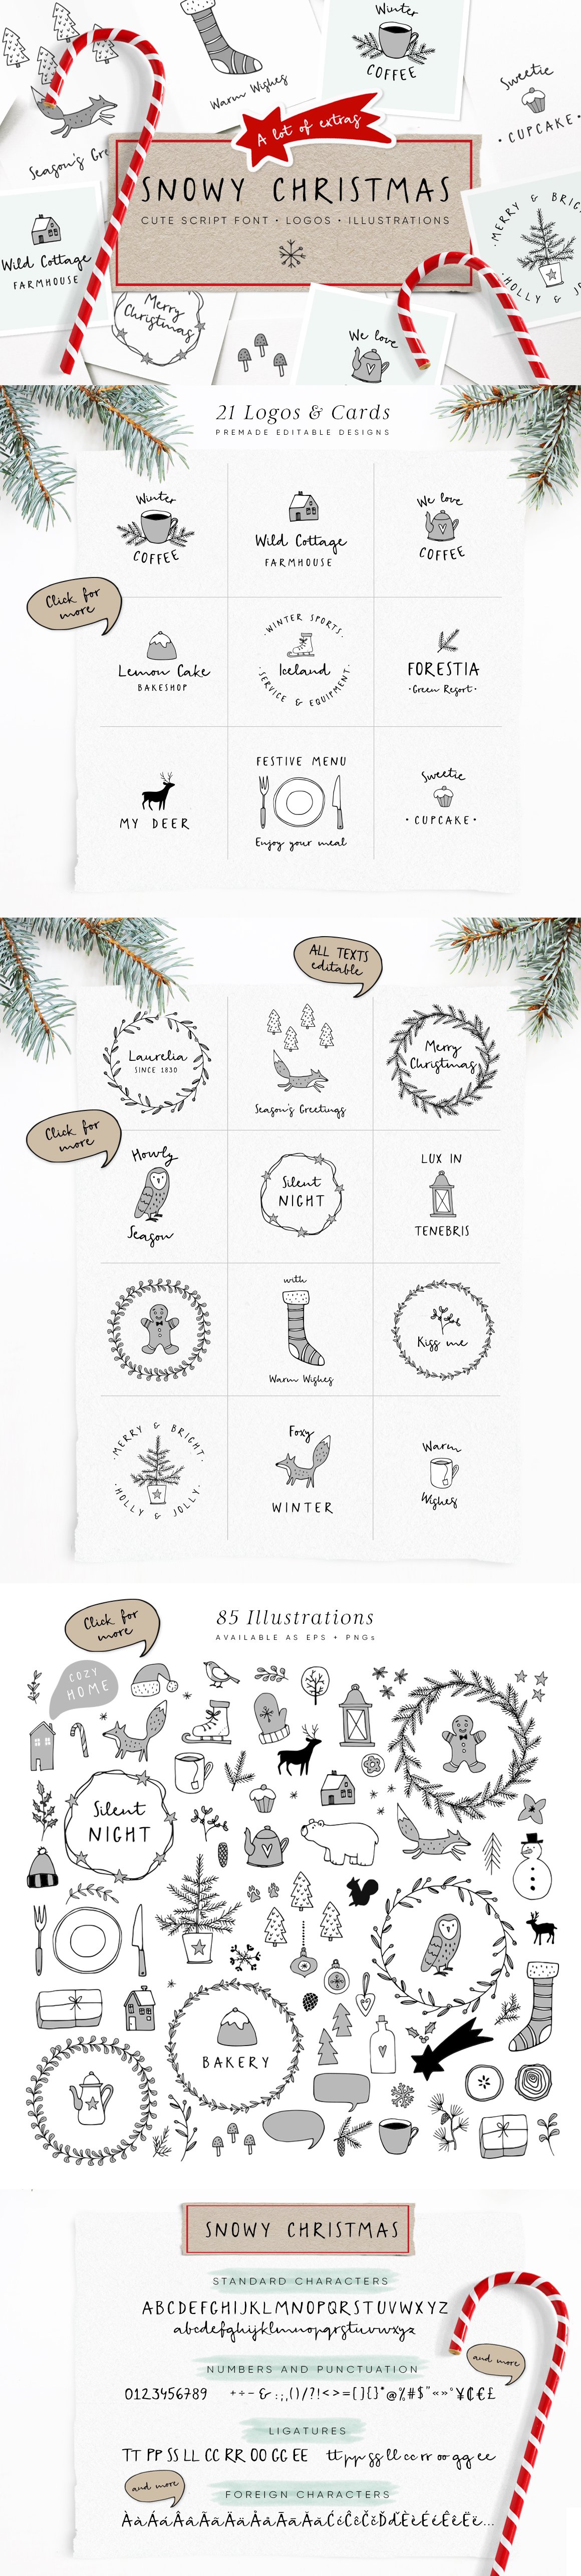 Snowy Christmas script font & logos cover image.